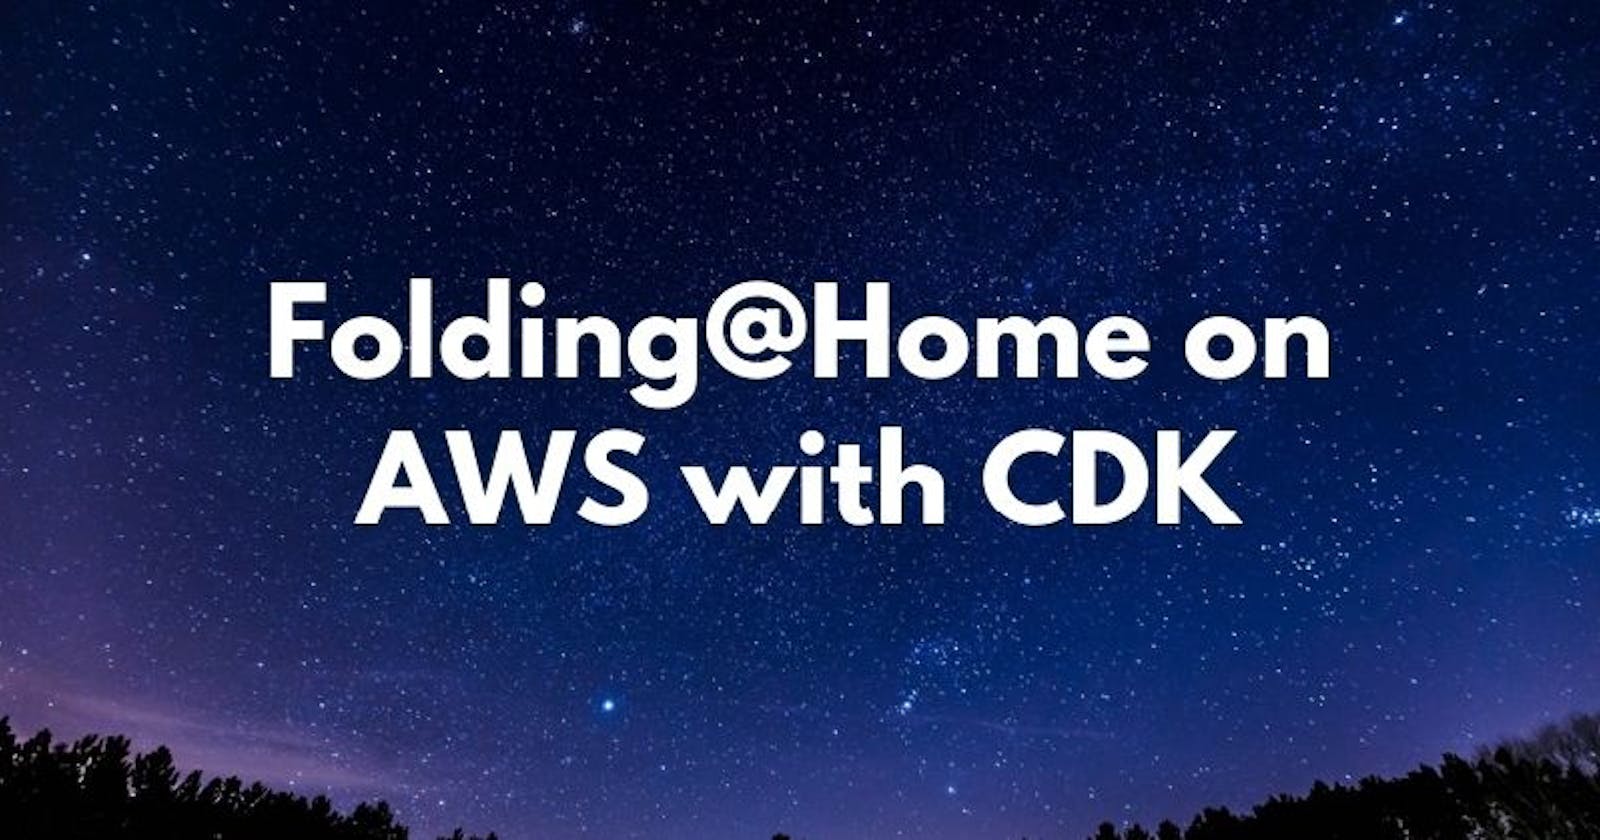 Run Folding@Home on AWS Spot instances with CDK